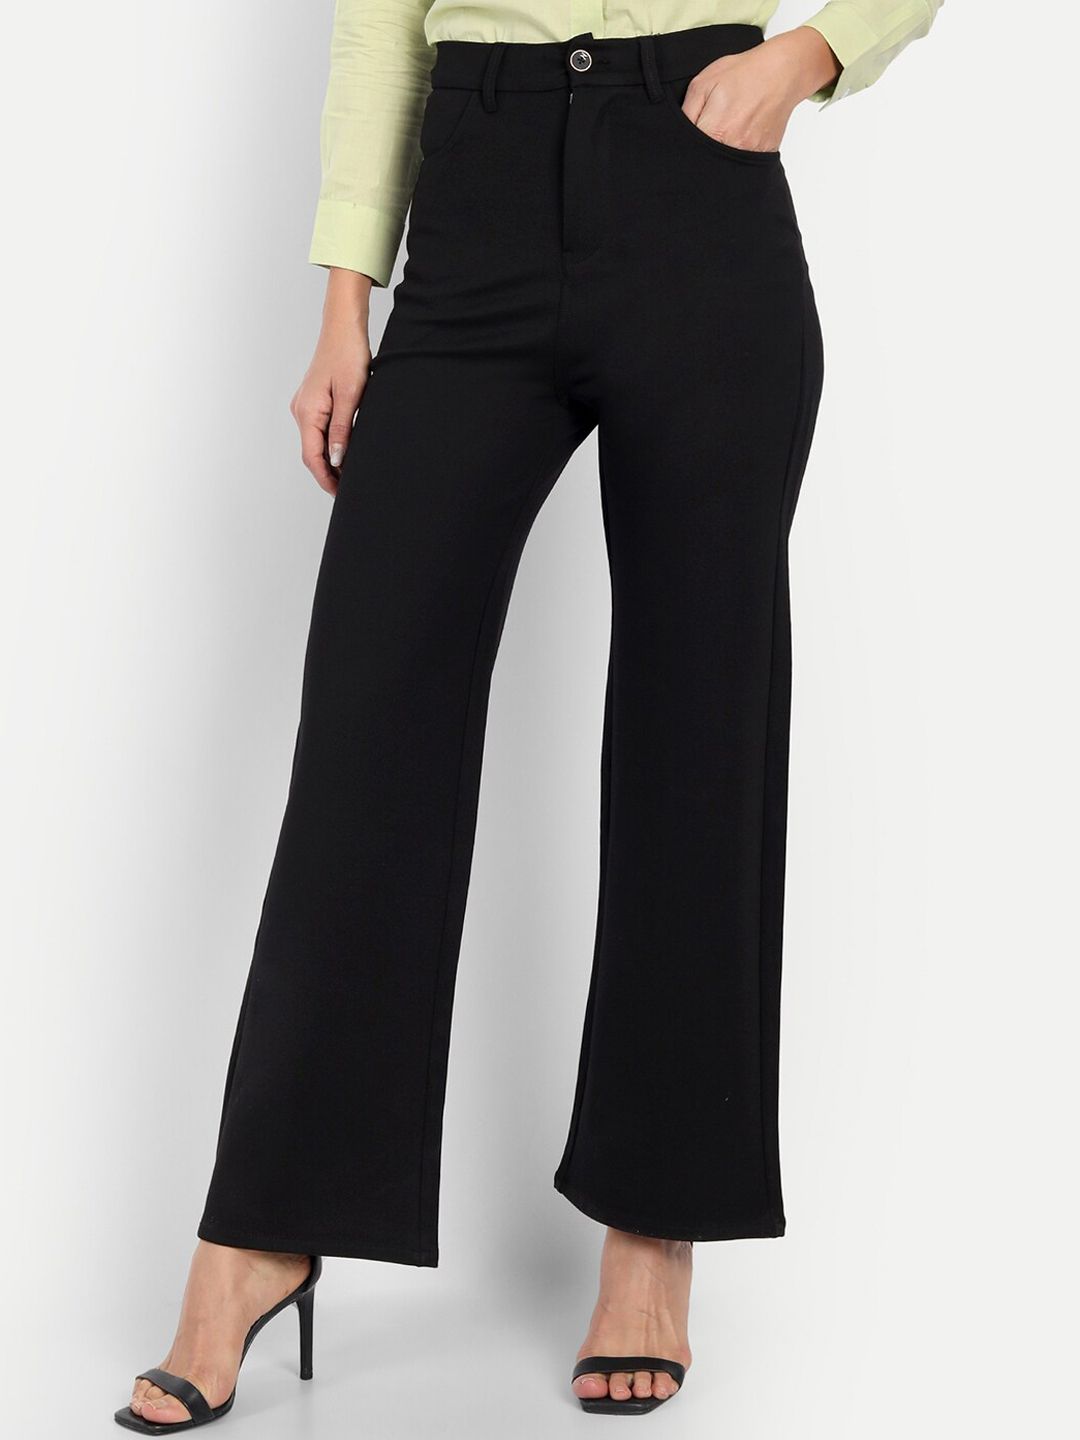 Next One Women Solid Loose Fit High-Rise Parallel Trousers Price in India